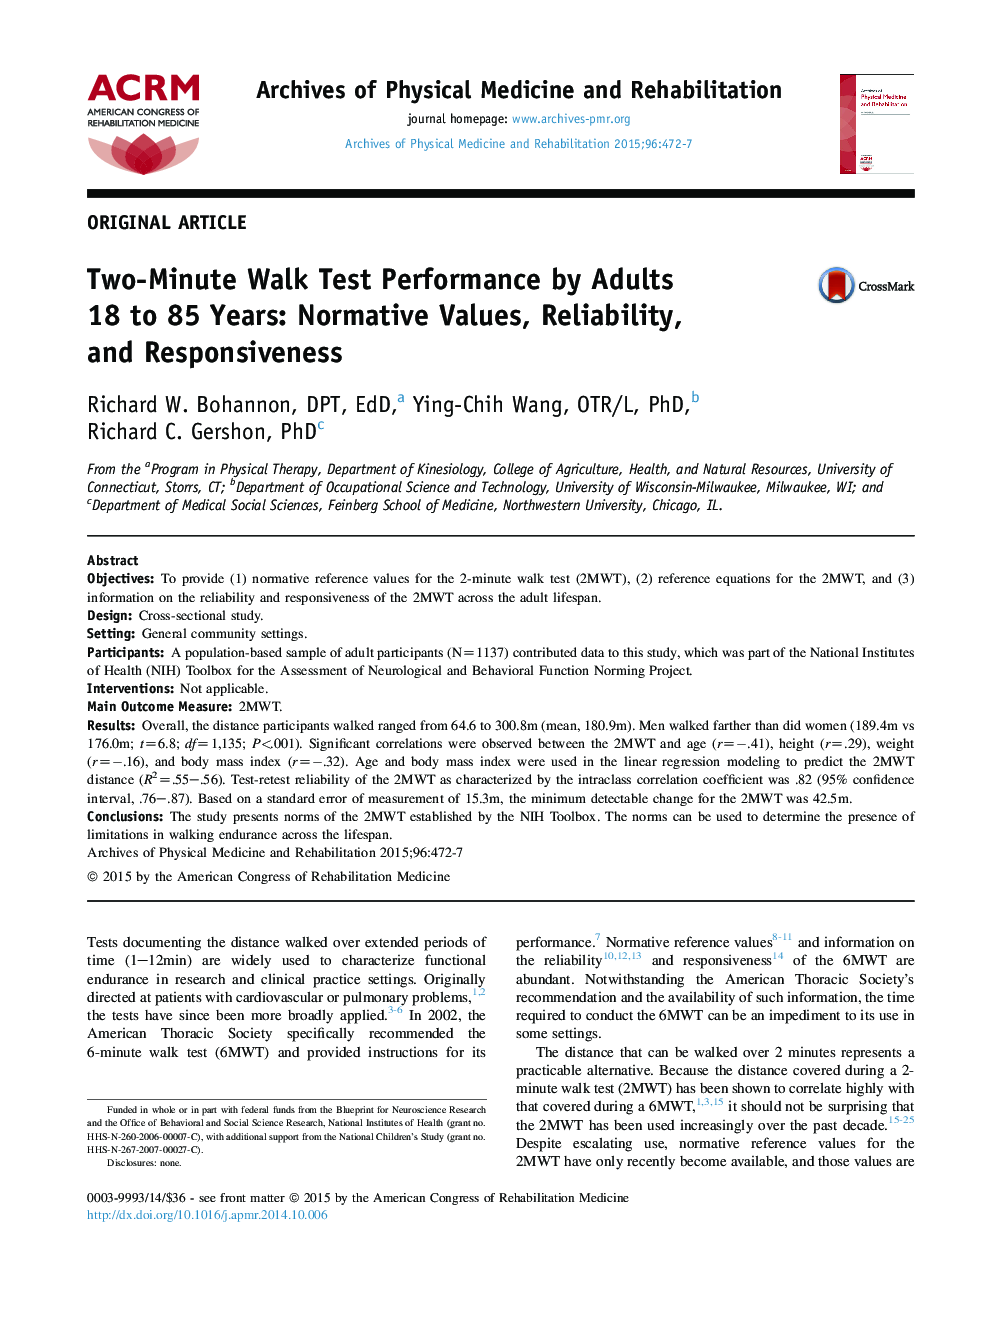 Two-Minute Walk Test Performance by Adults 18 to 85 Years: Normative Values, Reliability, andÂ Responsiveness